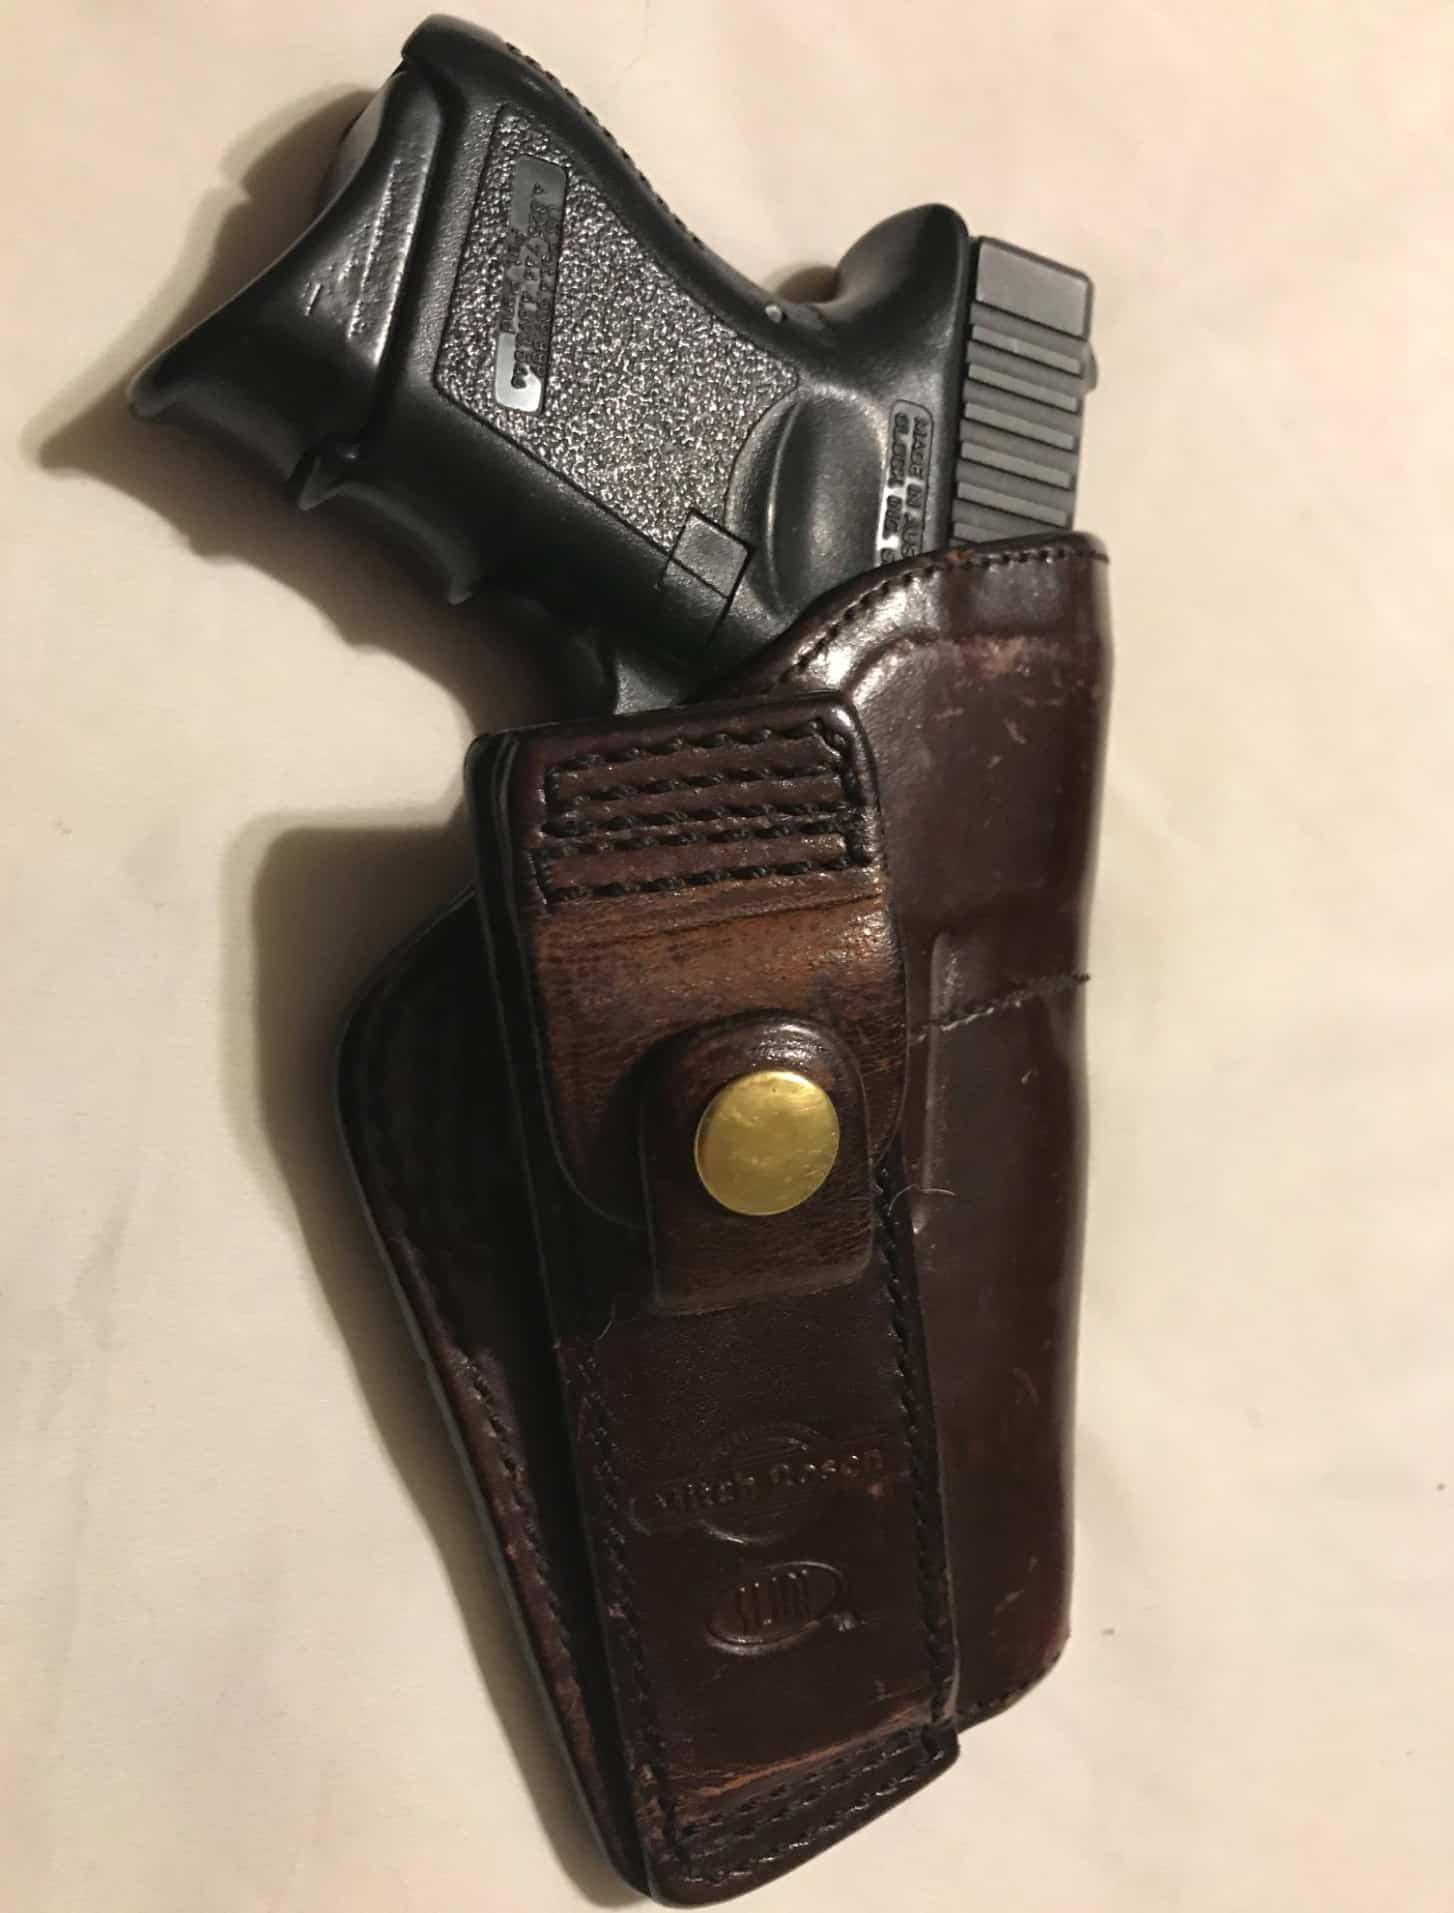 #DIGTHERIG – Darin and his Glock 27 in a Mitch Rosen Holster